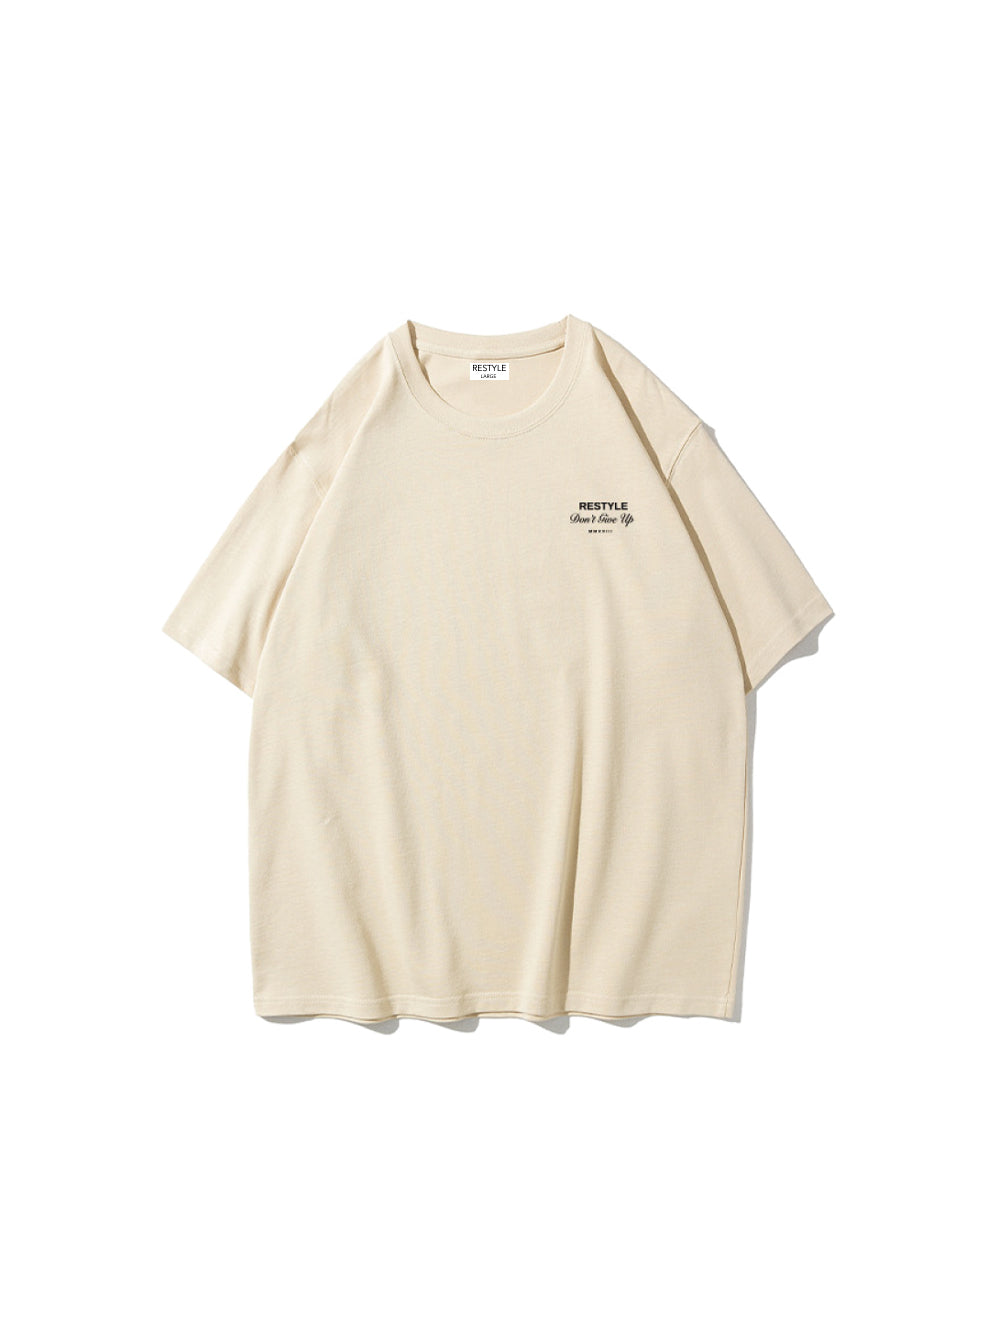 Restyle Valid Dreams - Oversized T-Shirt "Beige"